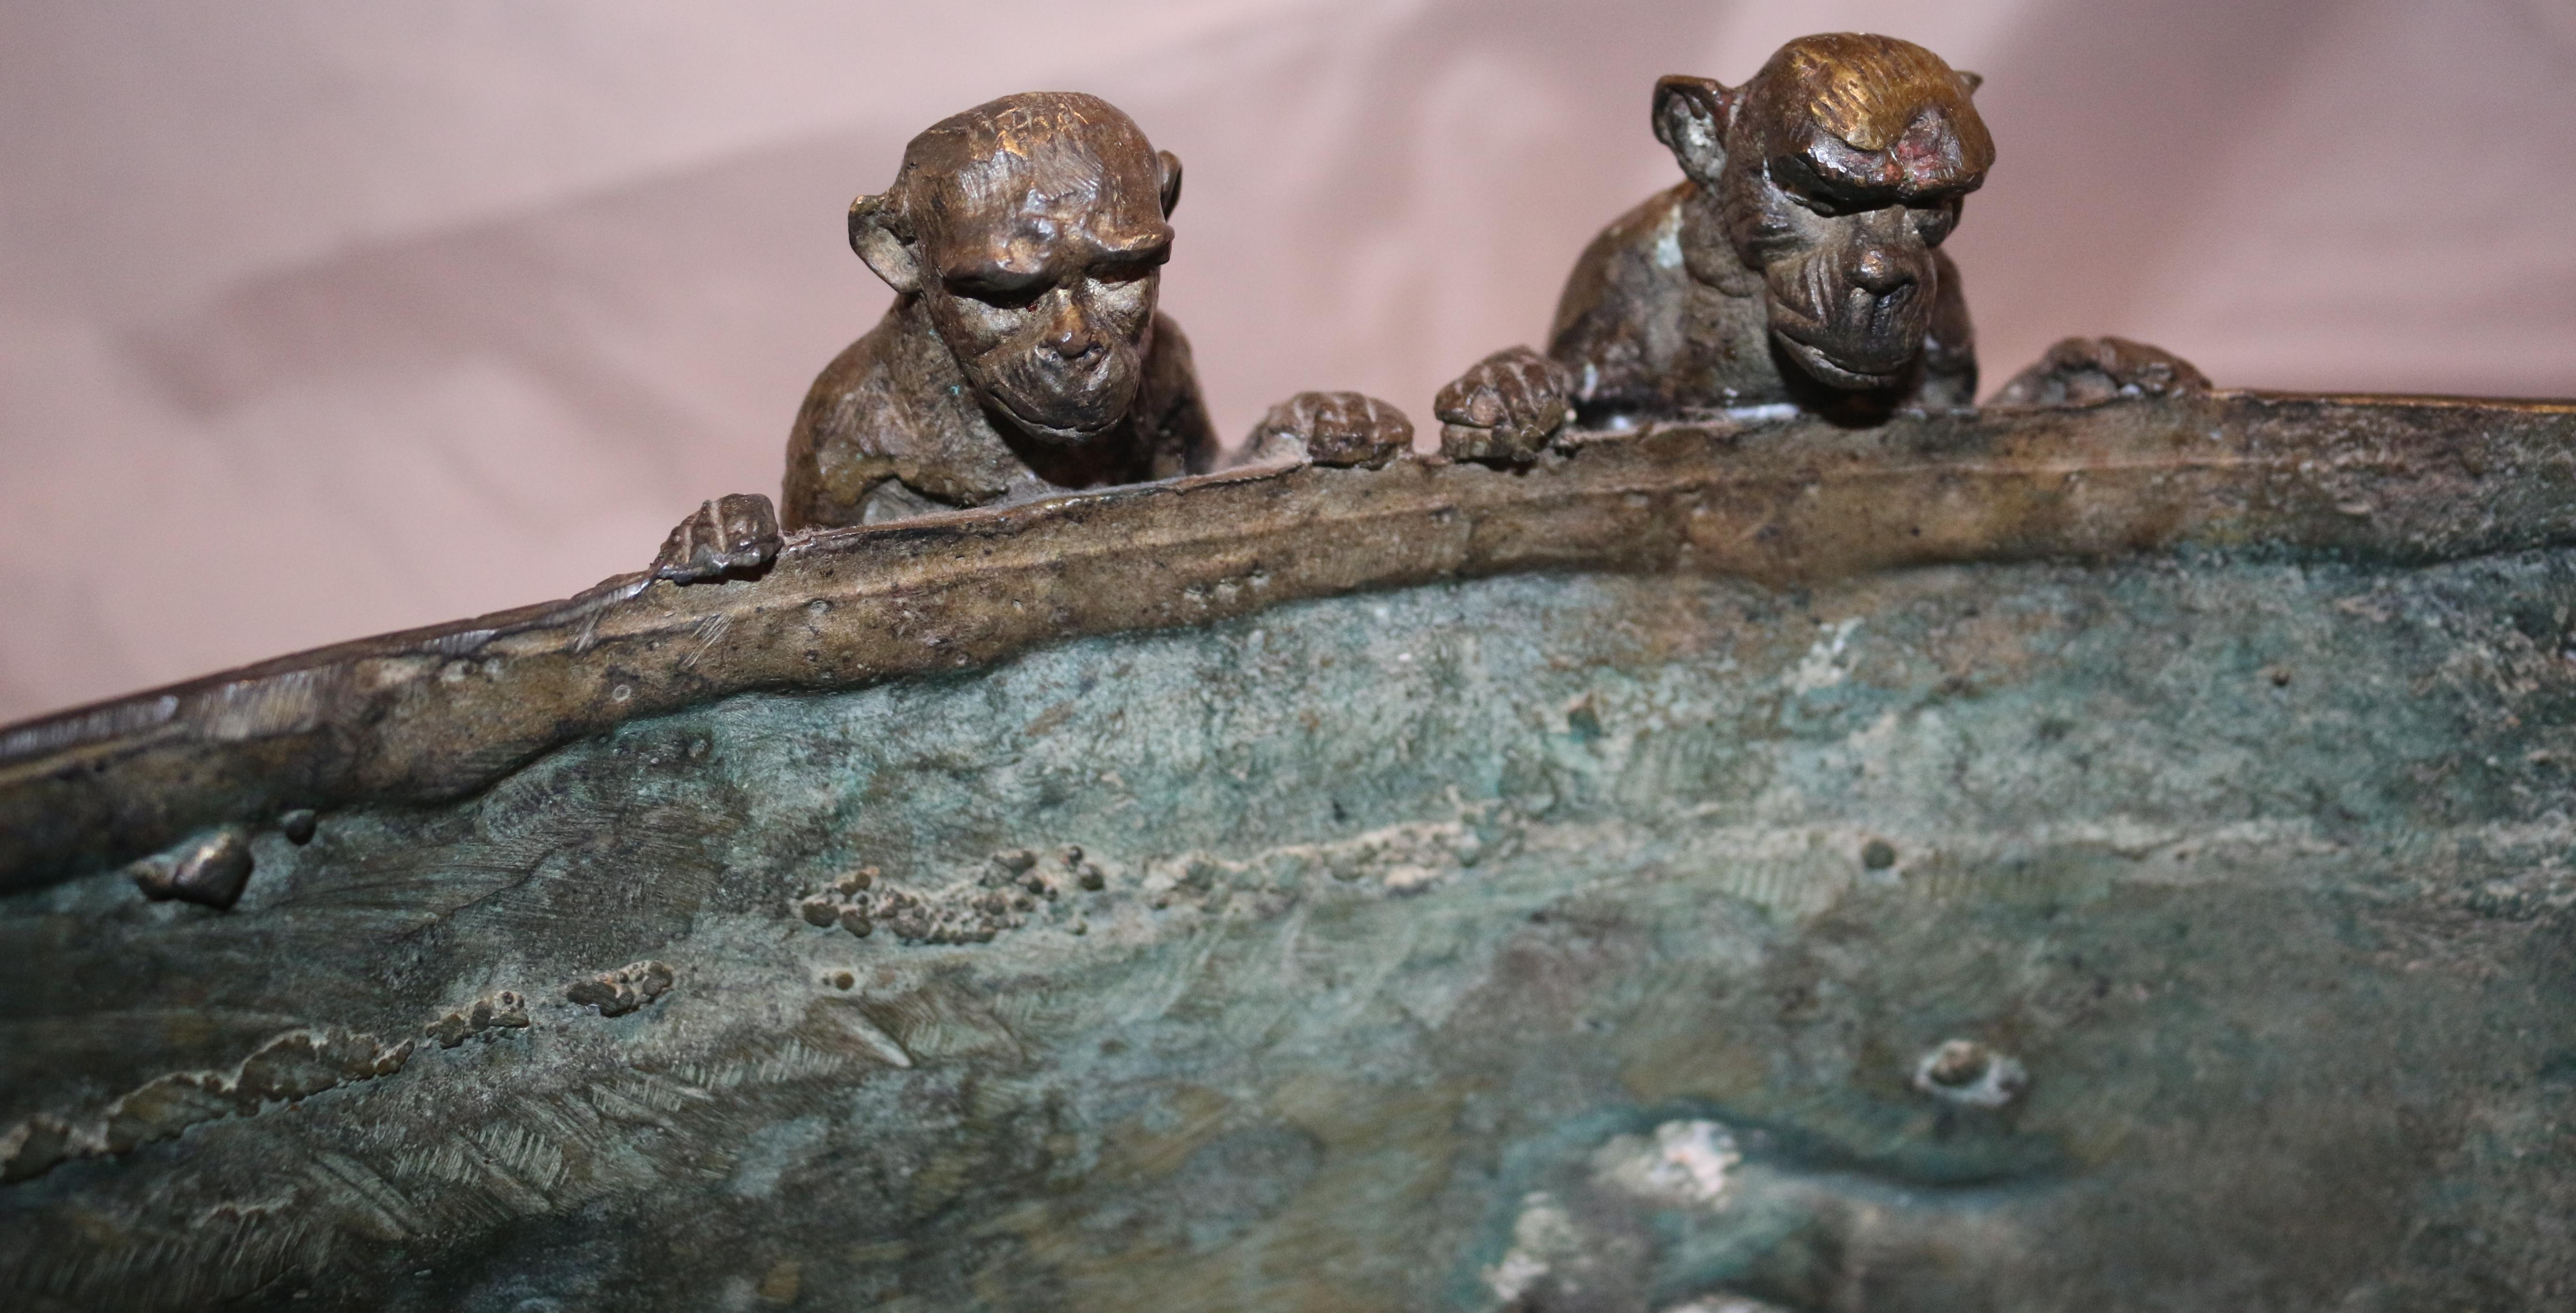 Antique Chines extra large bronze payer bowl Jardinière with 9 monkeys crawling up.
Attractive pettina inside.